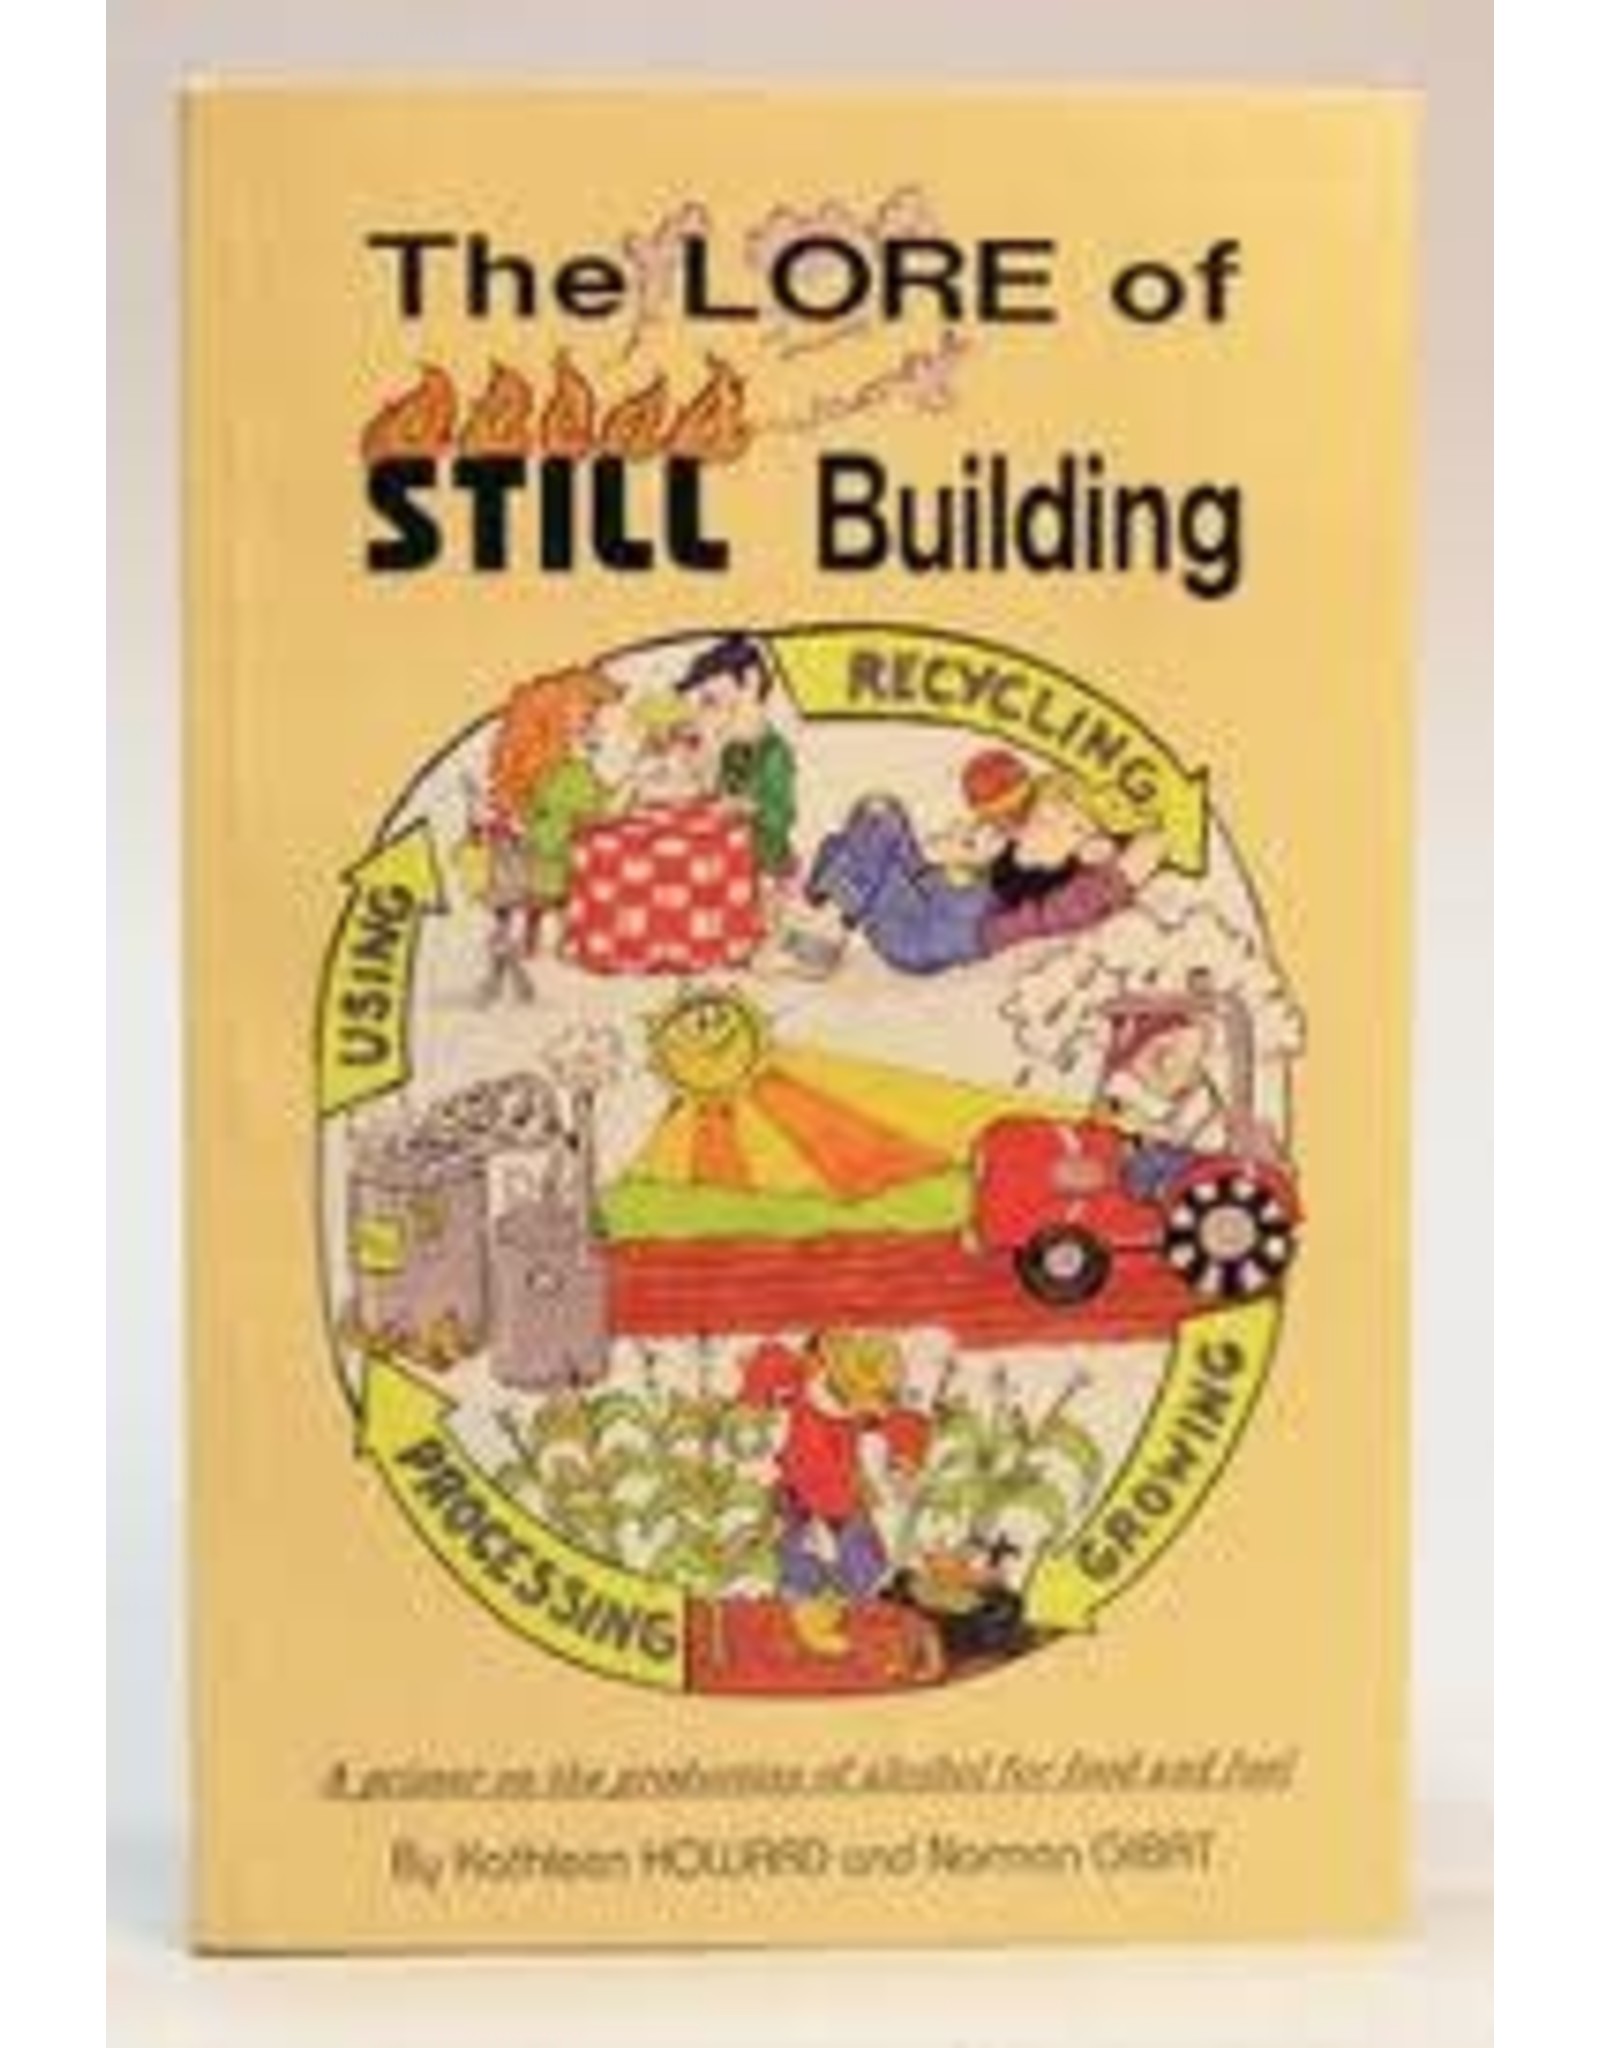 THE LORE OF STILL BUILDING